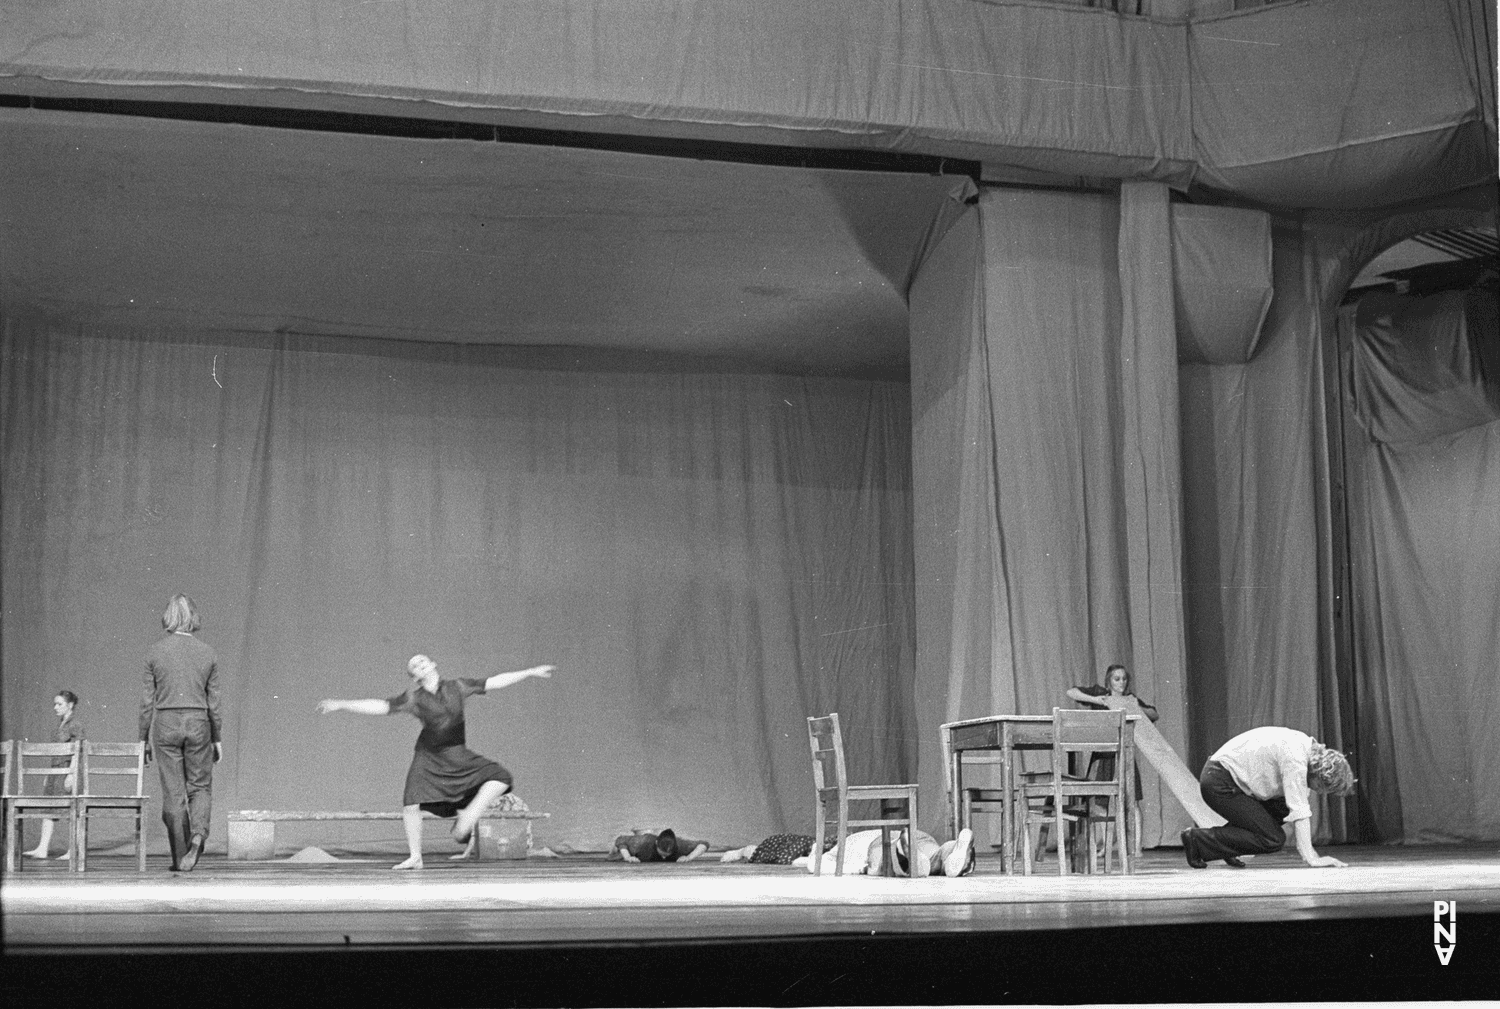 Michael Diekamp, Dominique Mercy and Josephine Ann Endicott in “Adagio – Five Songs by Gustav Mahler” by Pina Bausch